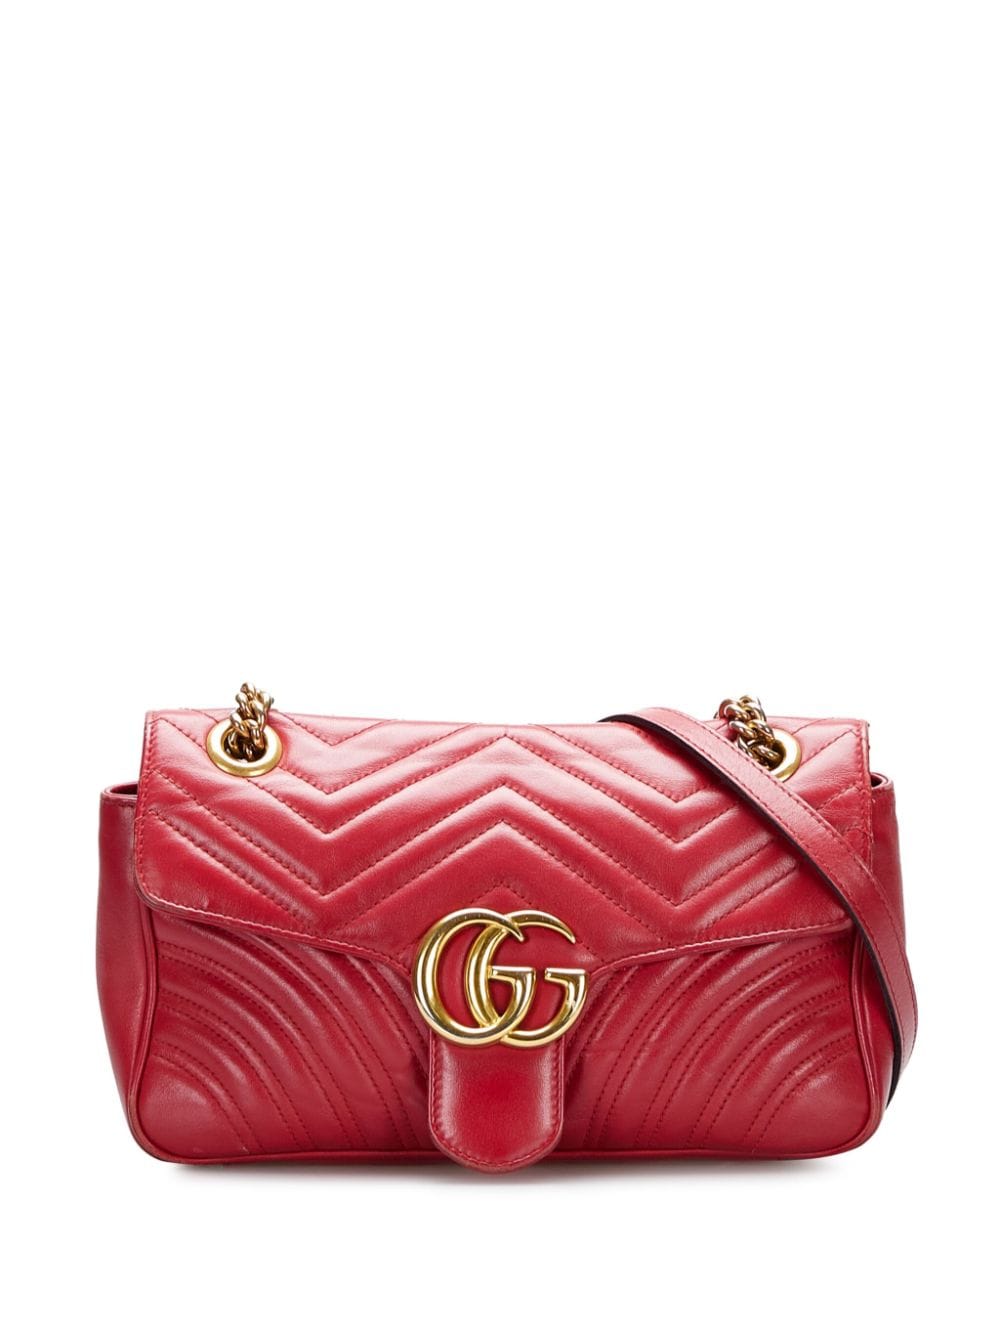 Gucci Pre-Owned 2000-2015 GG Marmont Schultertasche - Rot von Gucci Pre-Owned